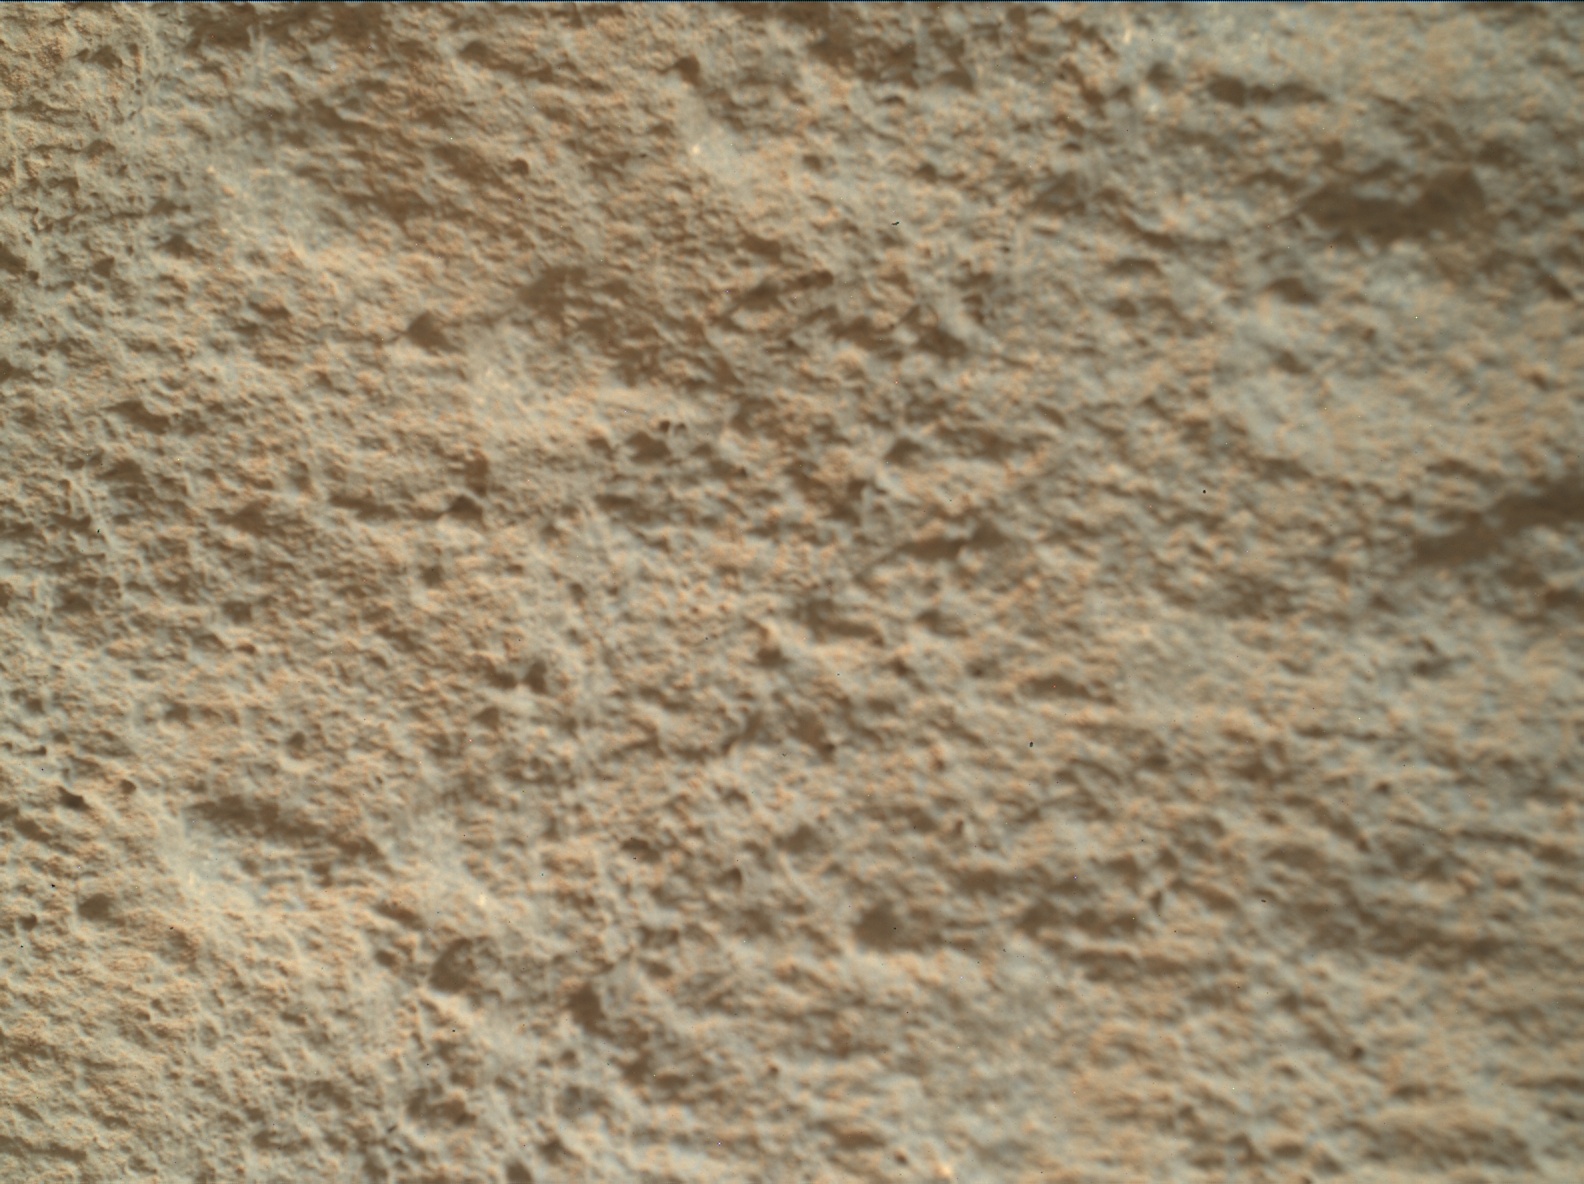 Nasa's Mars rover Curiosity acquired this image using its Mars Hand Lens Imager (MAHLI) on Sol 2699